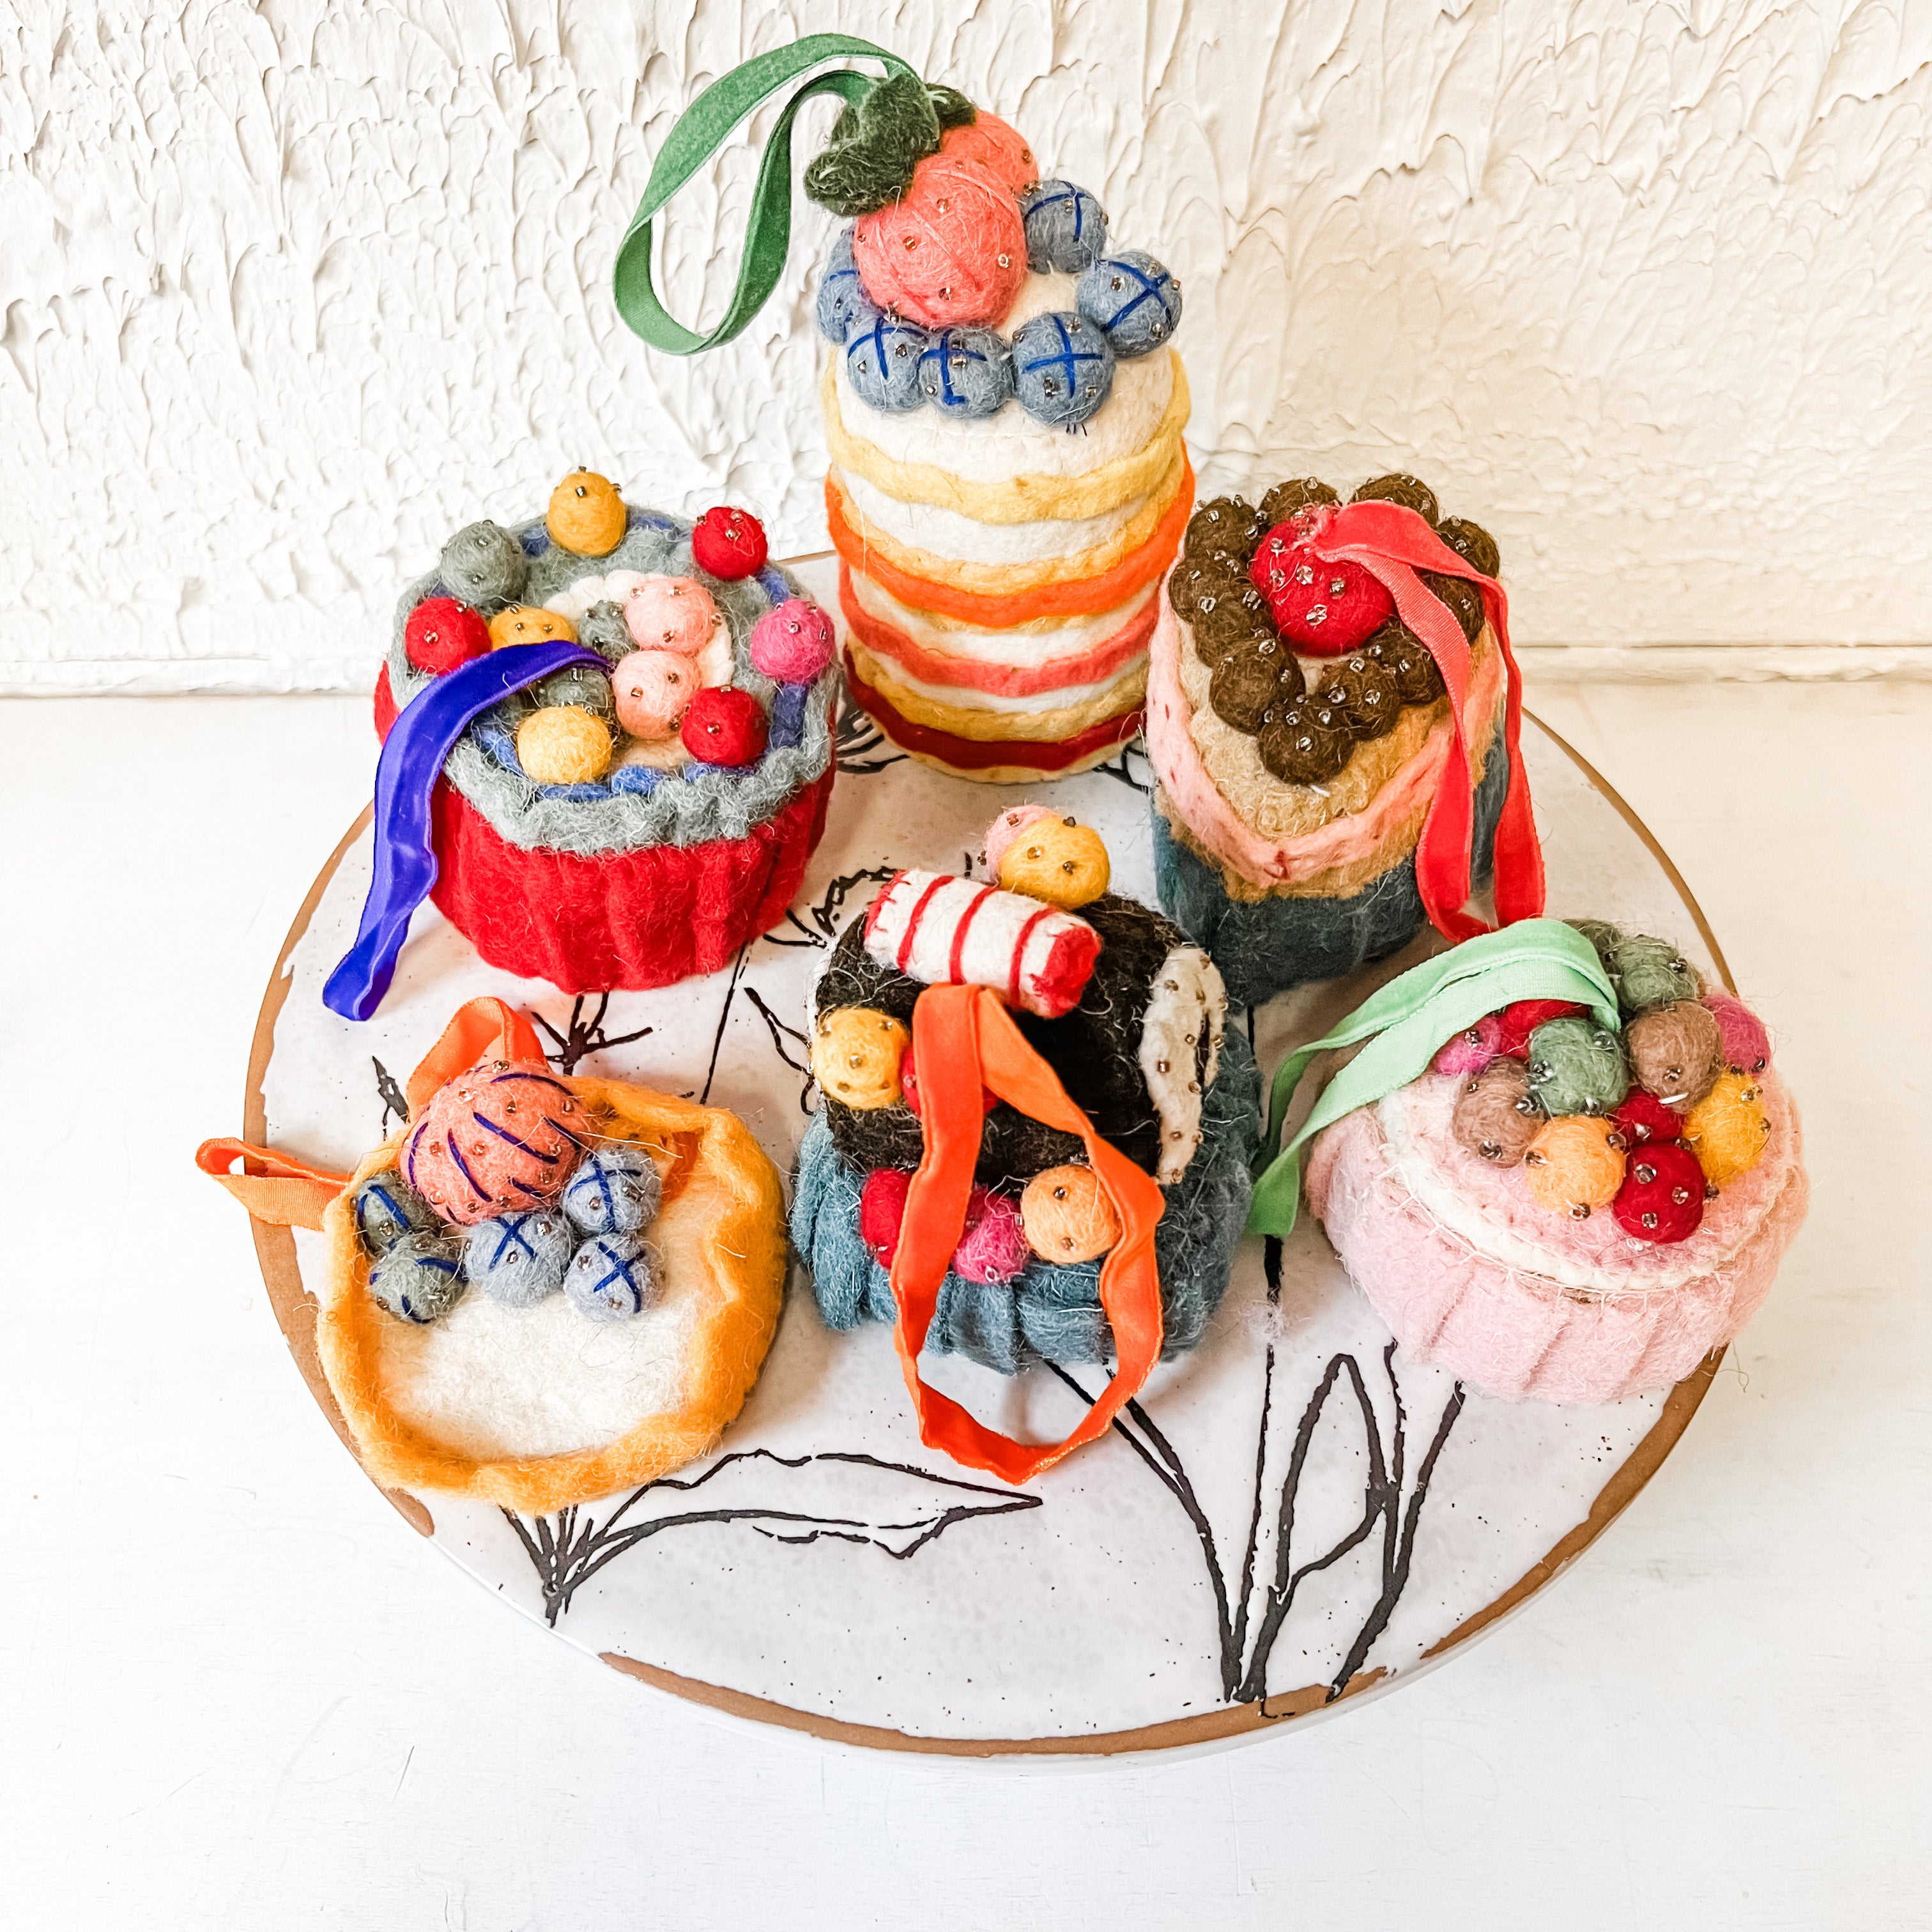 Wool Pastry Ornaments